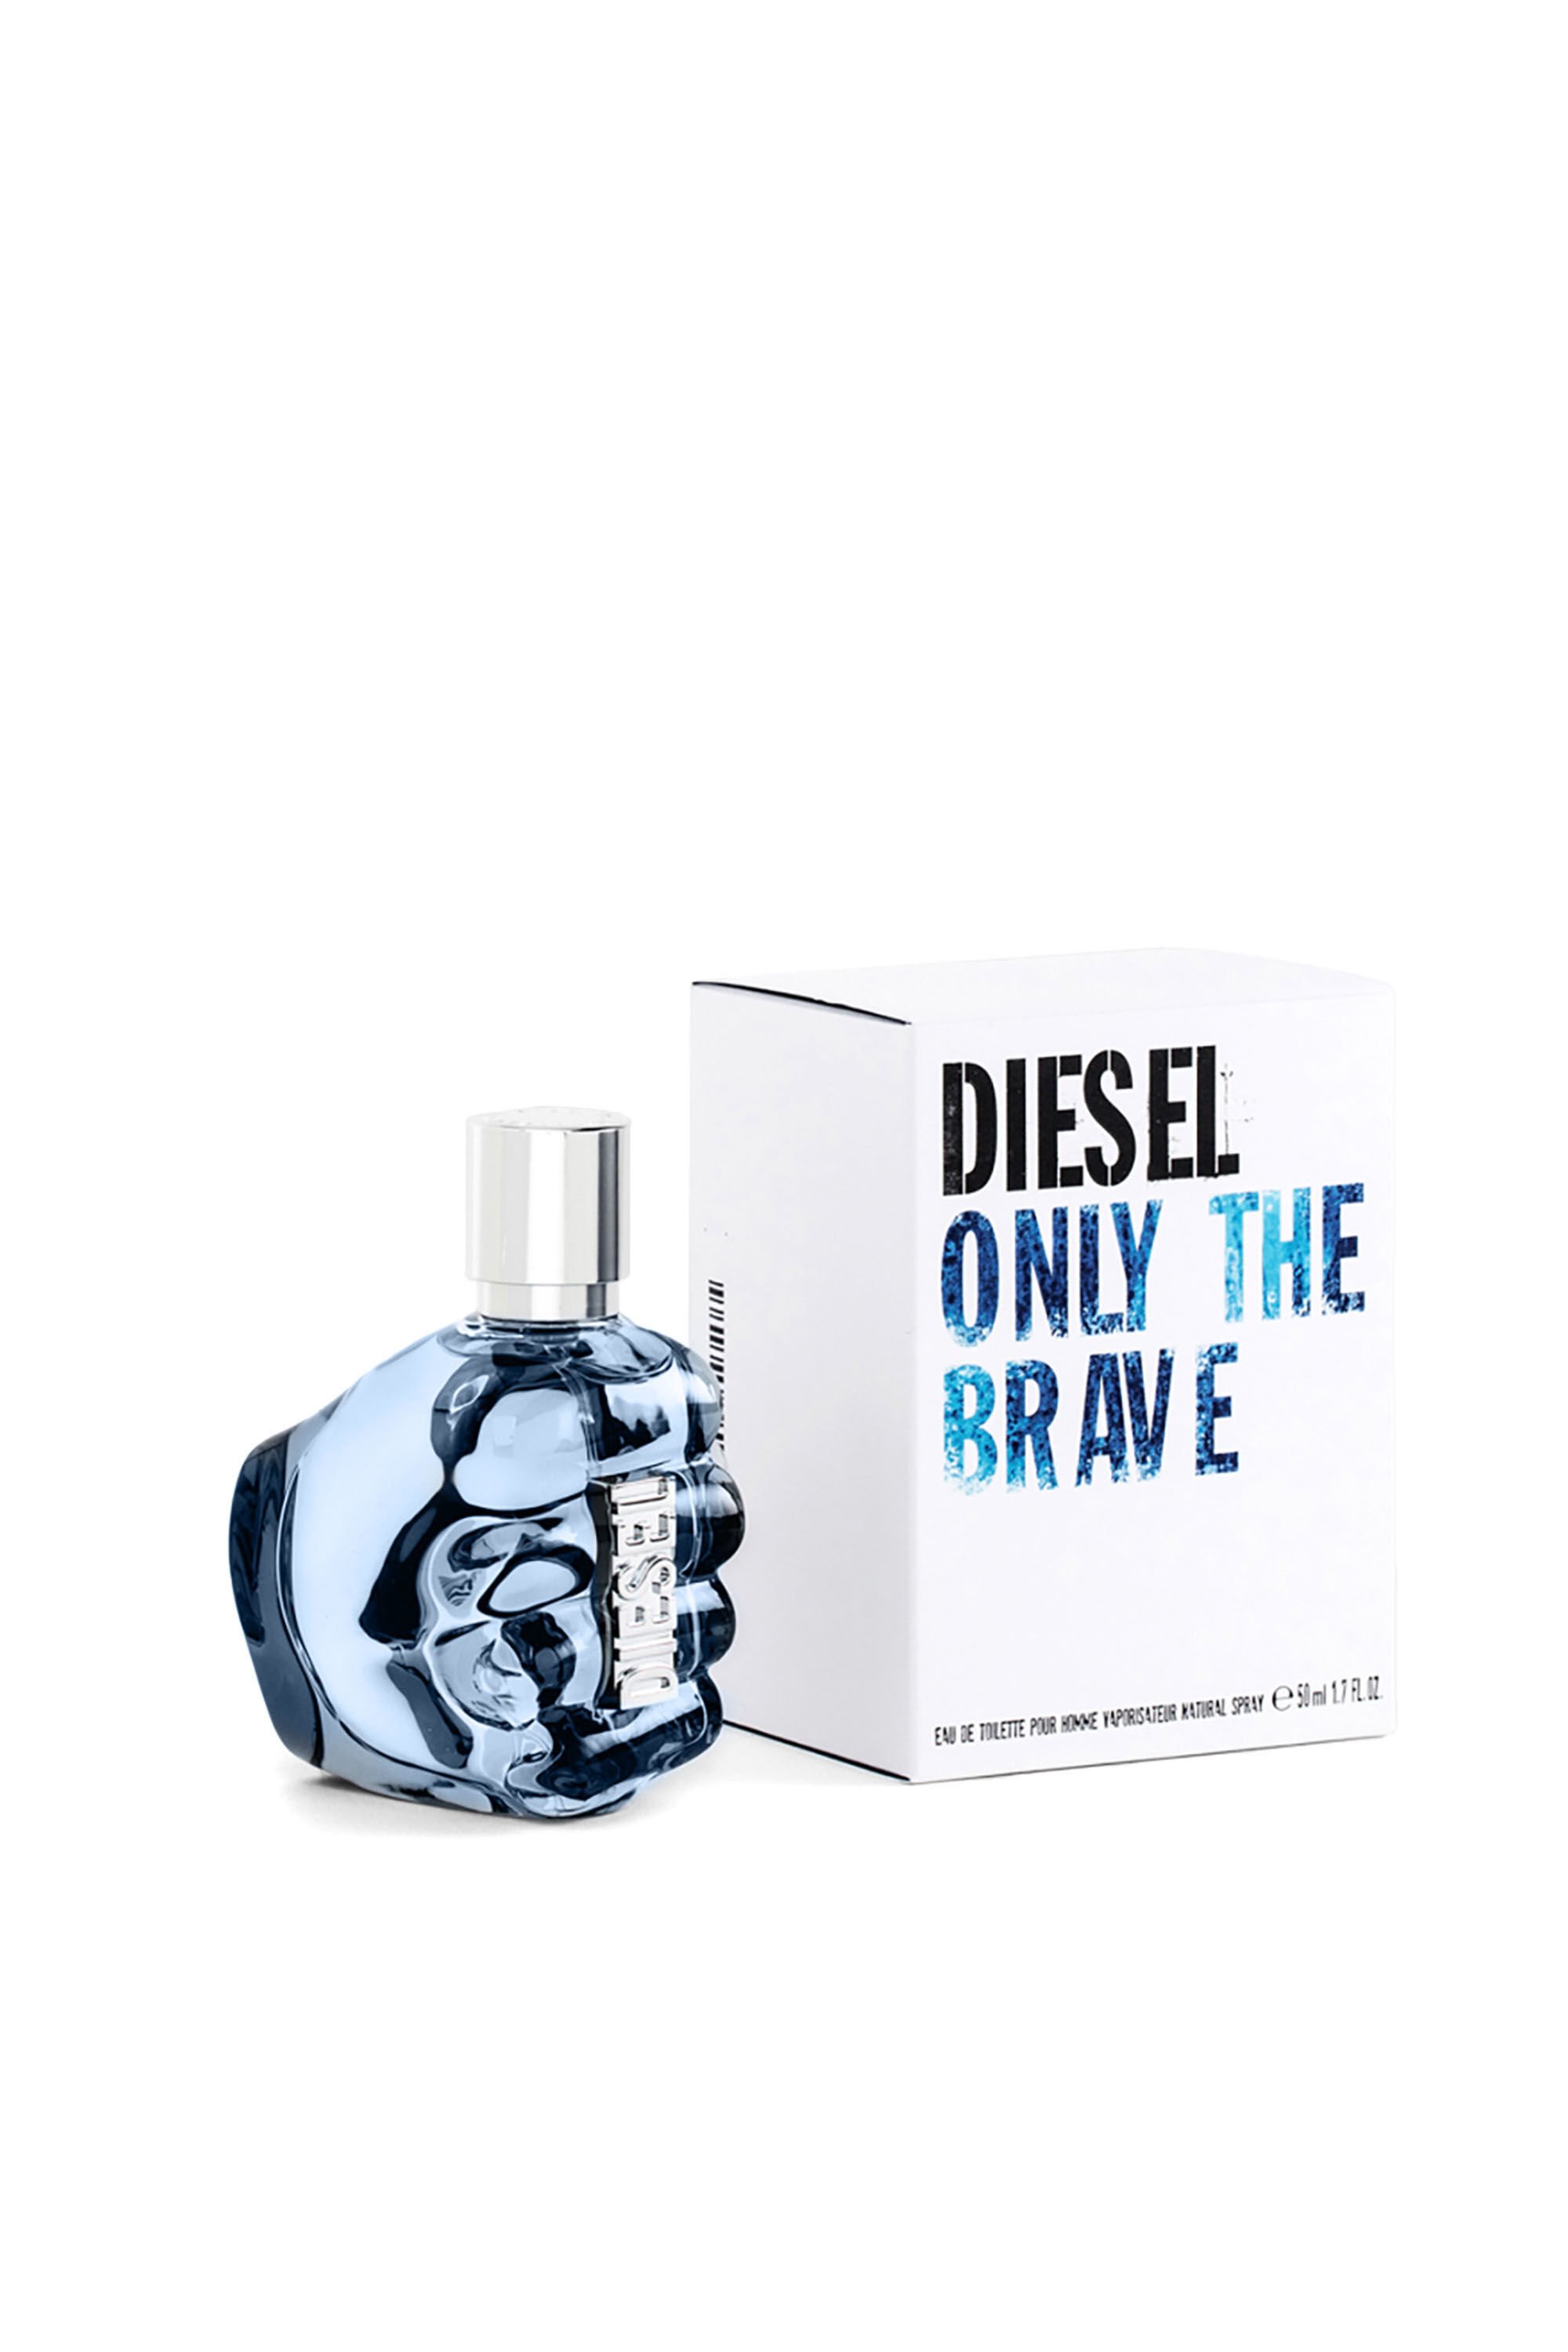 Diesel - ONLY THE BRAVE 50ML, Hombre Only The Brave 50ml, Eau de Toilette in Azul marino - Image 2